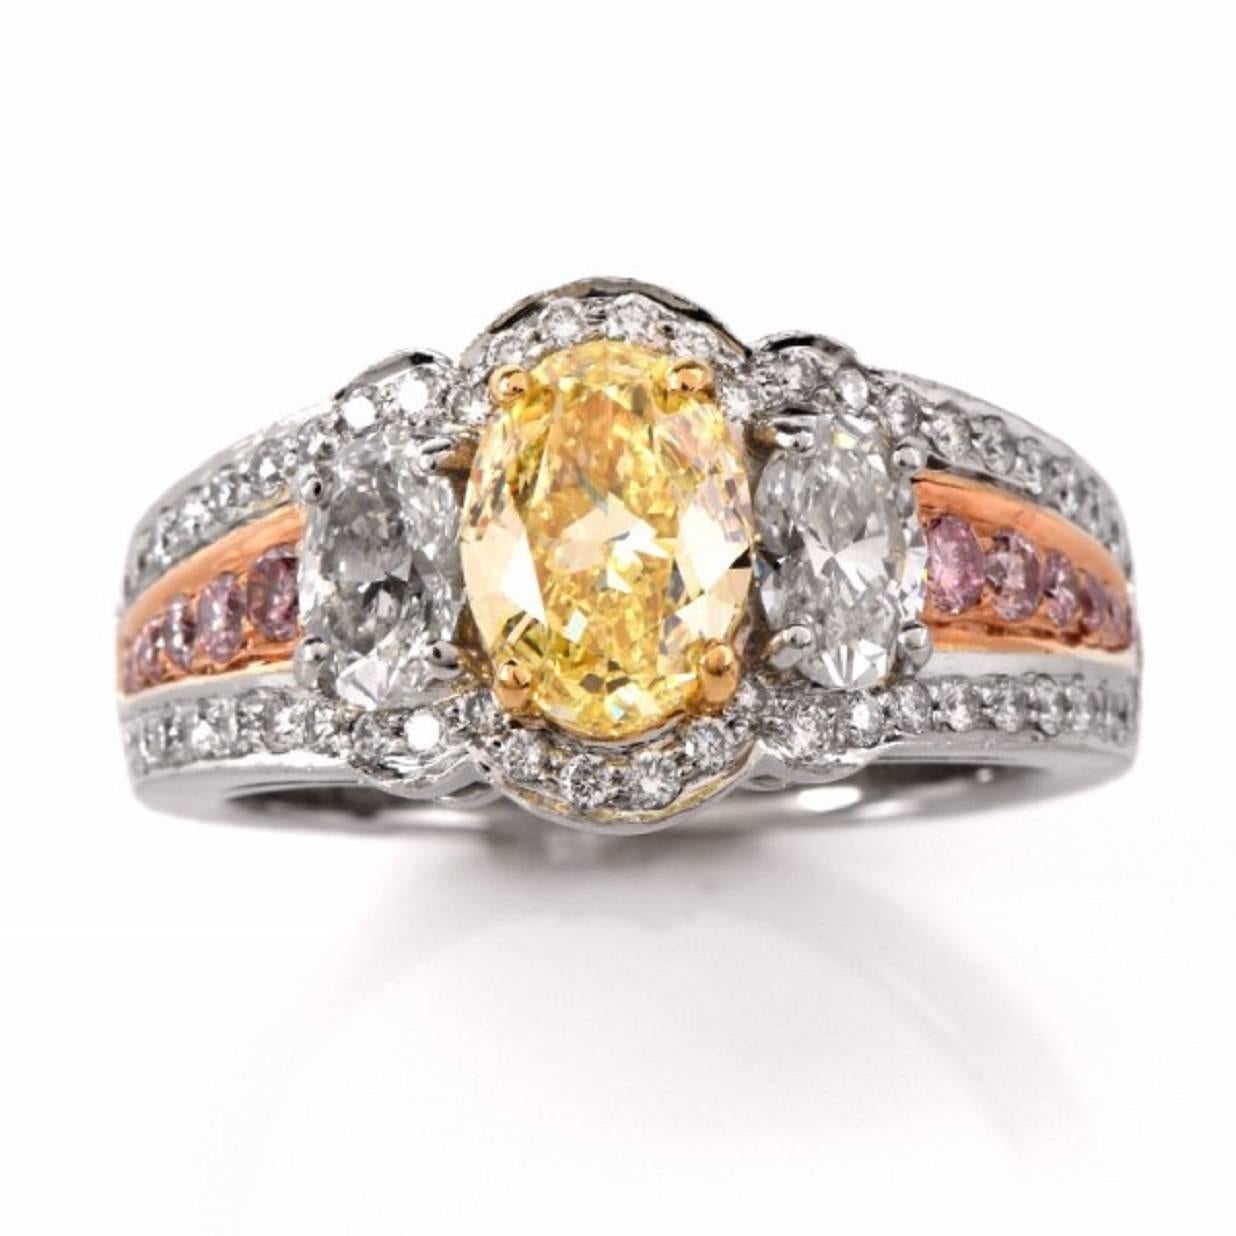 This designer Charles Krypell engagement ring with a GIA certified oval-faceted fancy yellow and colorless marquise diamonds  is crafted in solid platinum with a touch of 18K yellow gold applied to the setting of pink diamonds on the shoulders. The